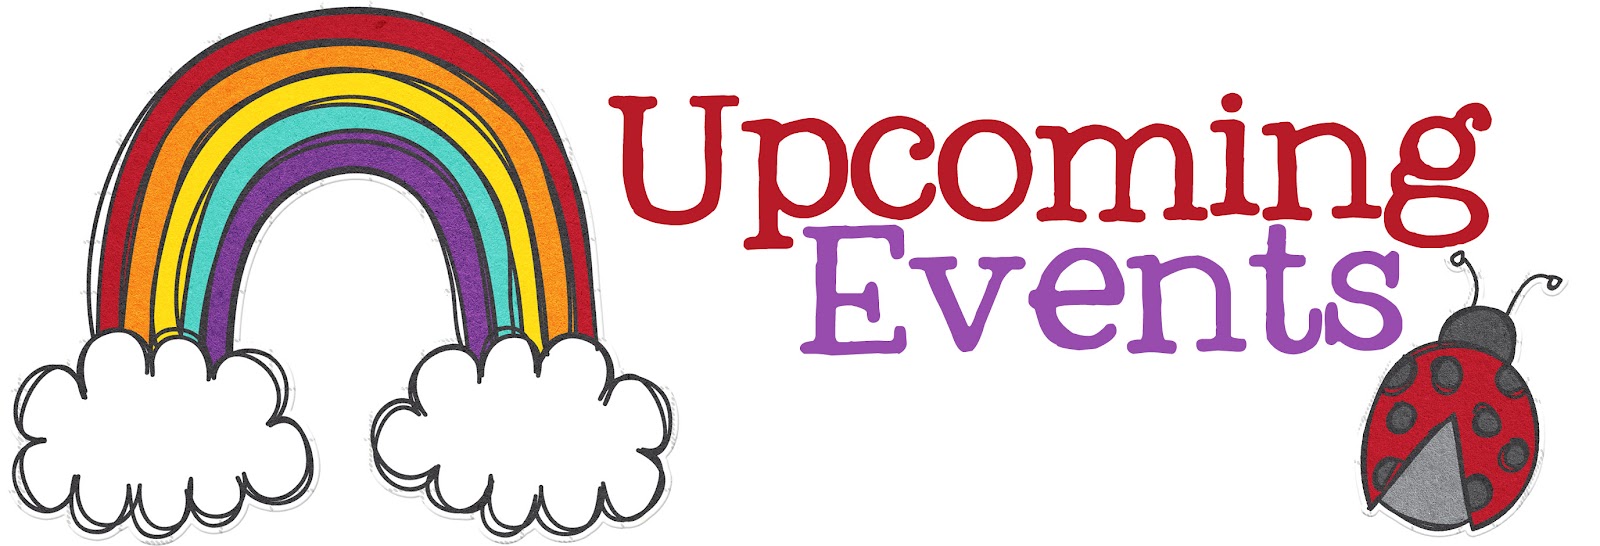 Churches Upcoming Event Clip  - Upcoming Events Clip Art